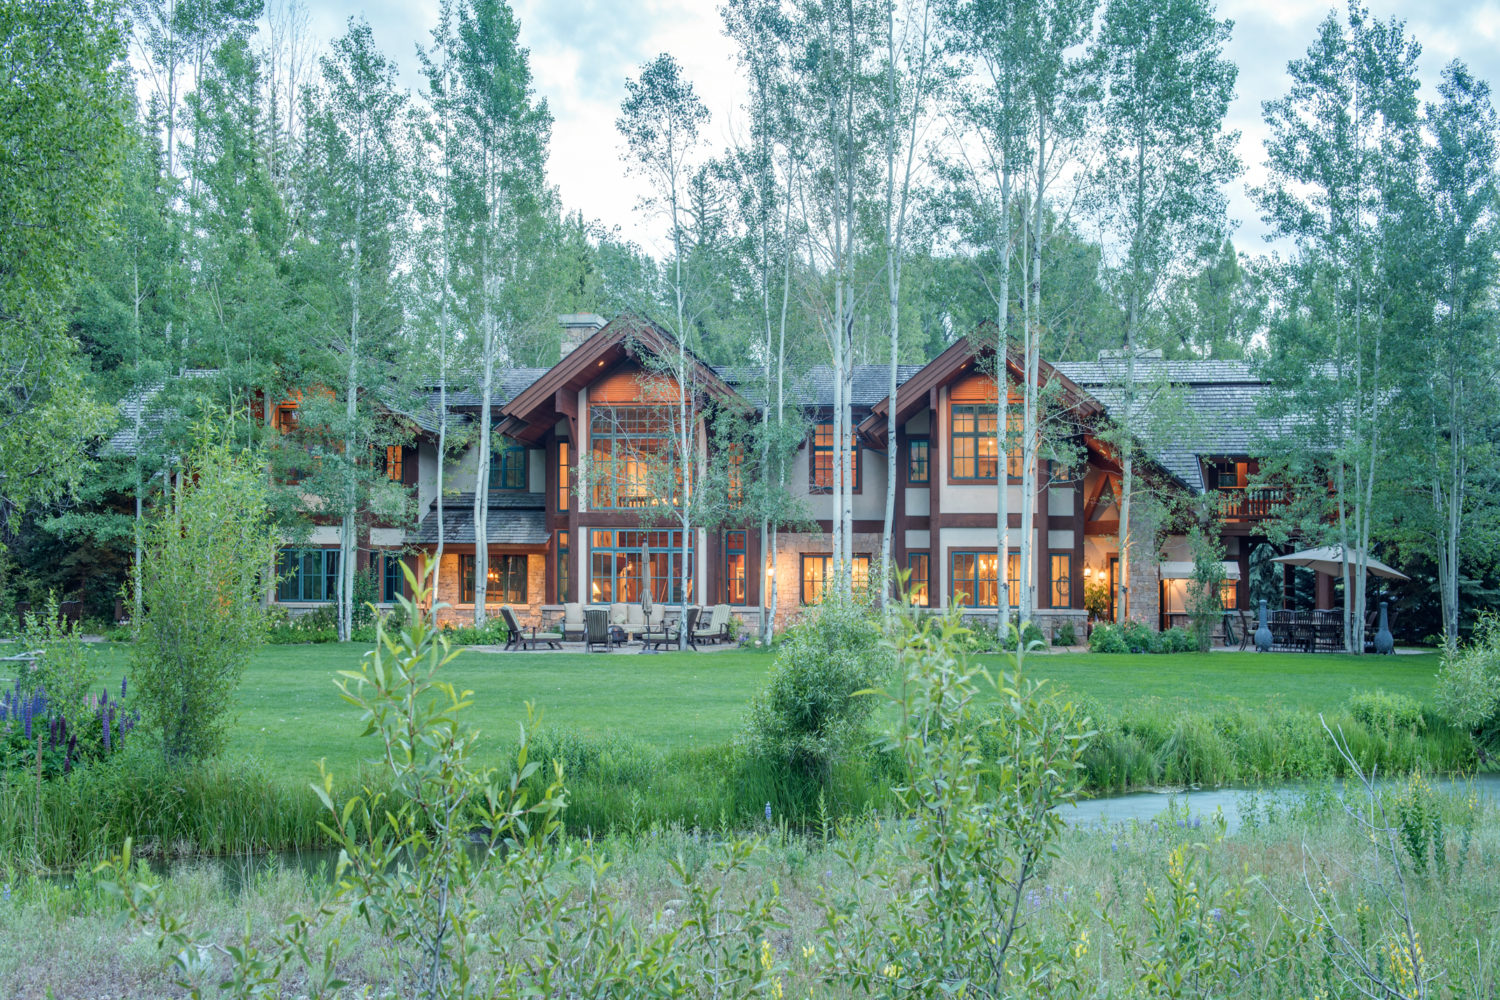 A creek and lawn in front of a big house surrounded by aspens